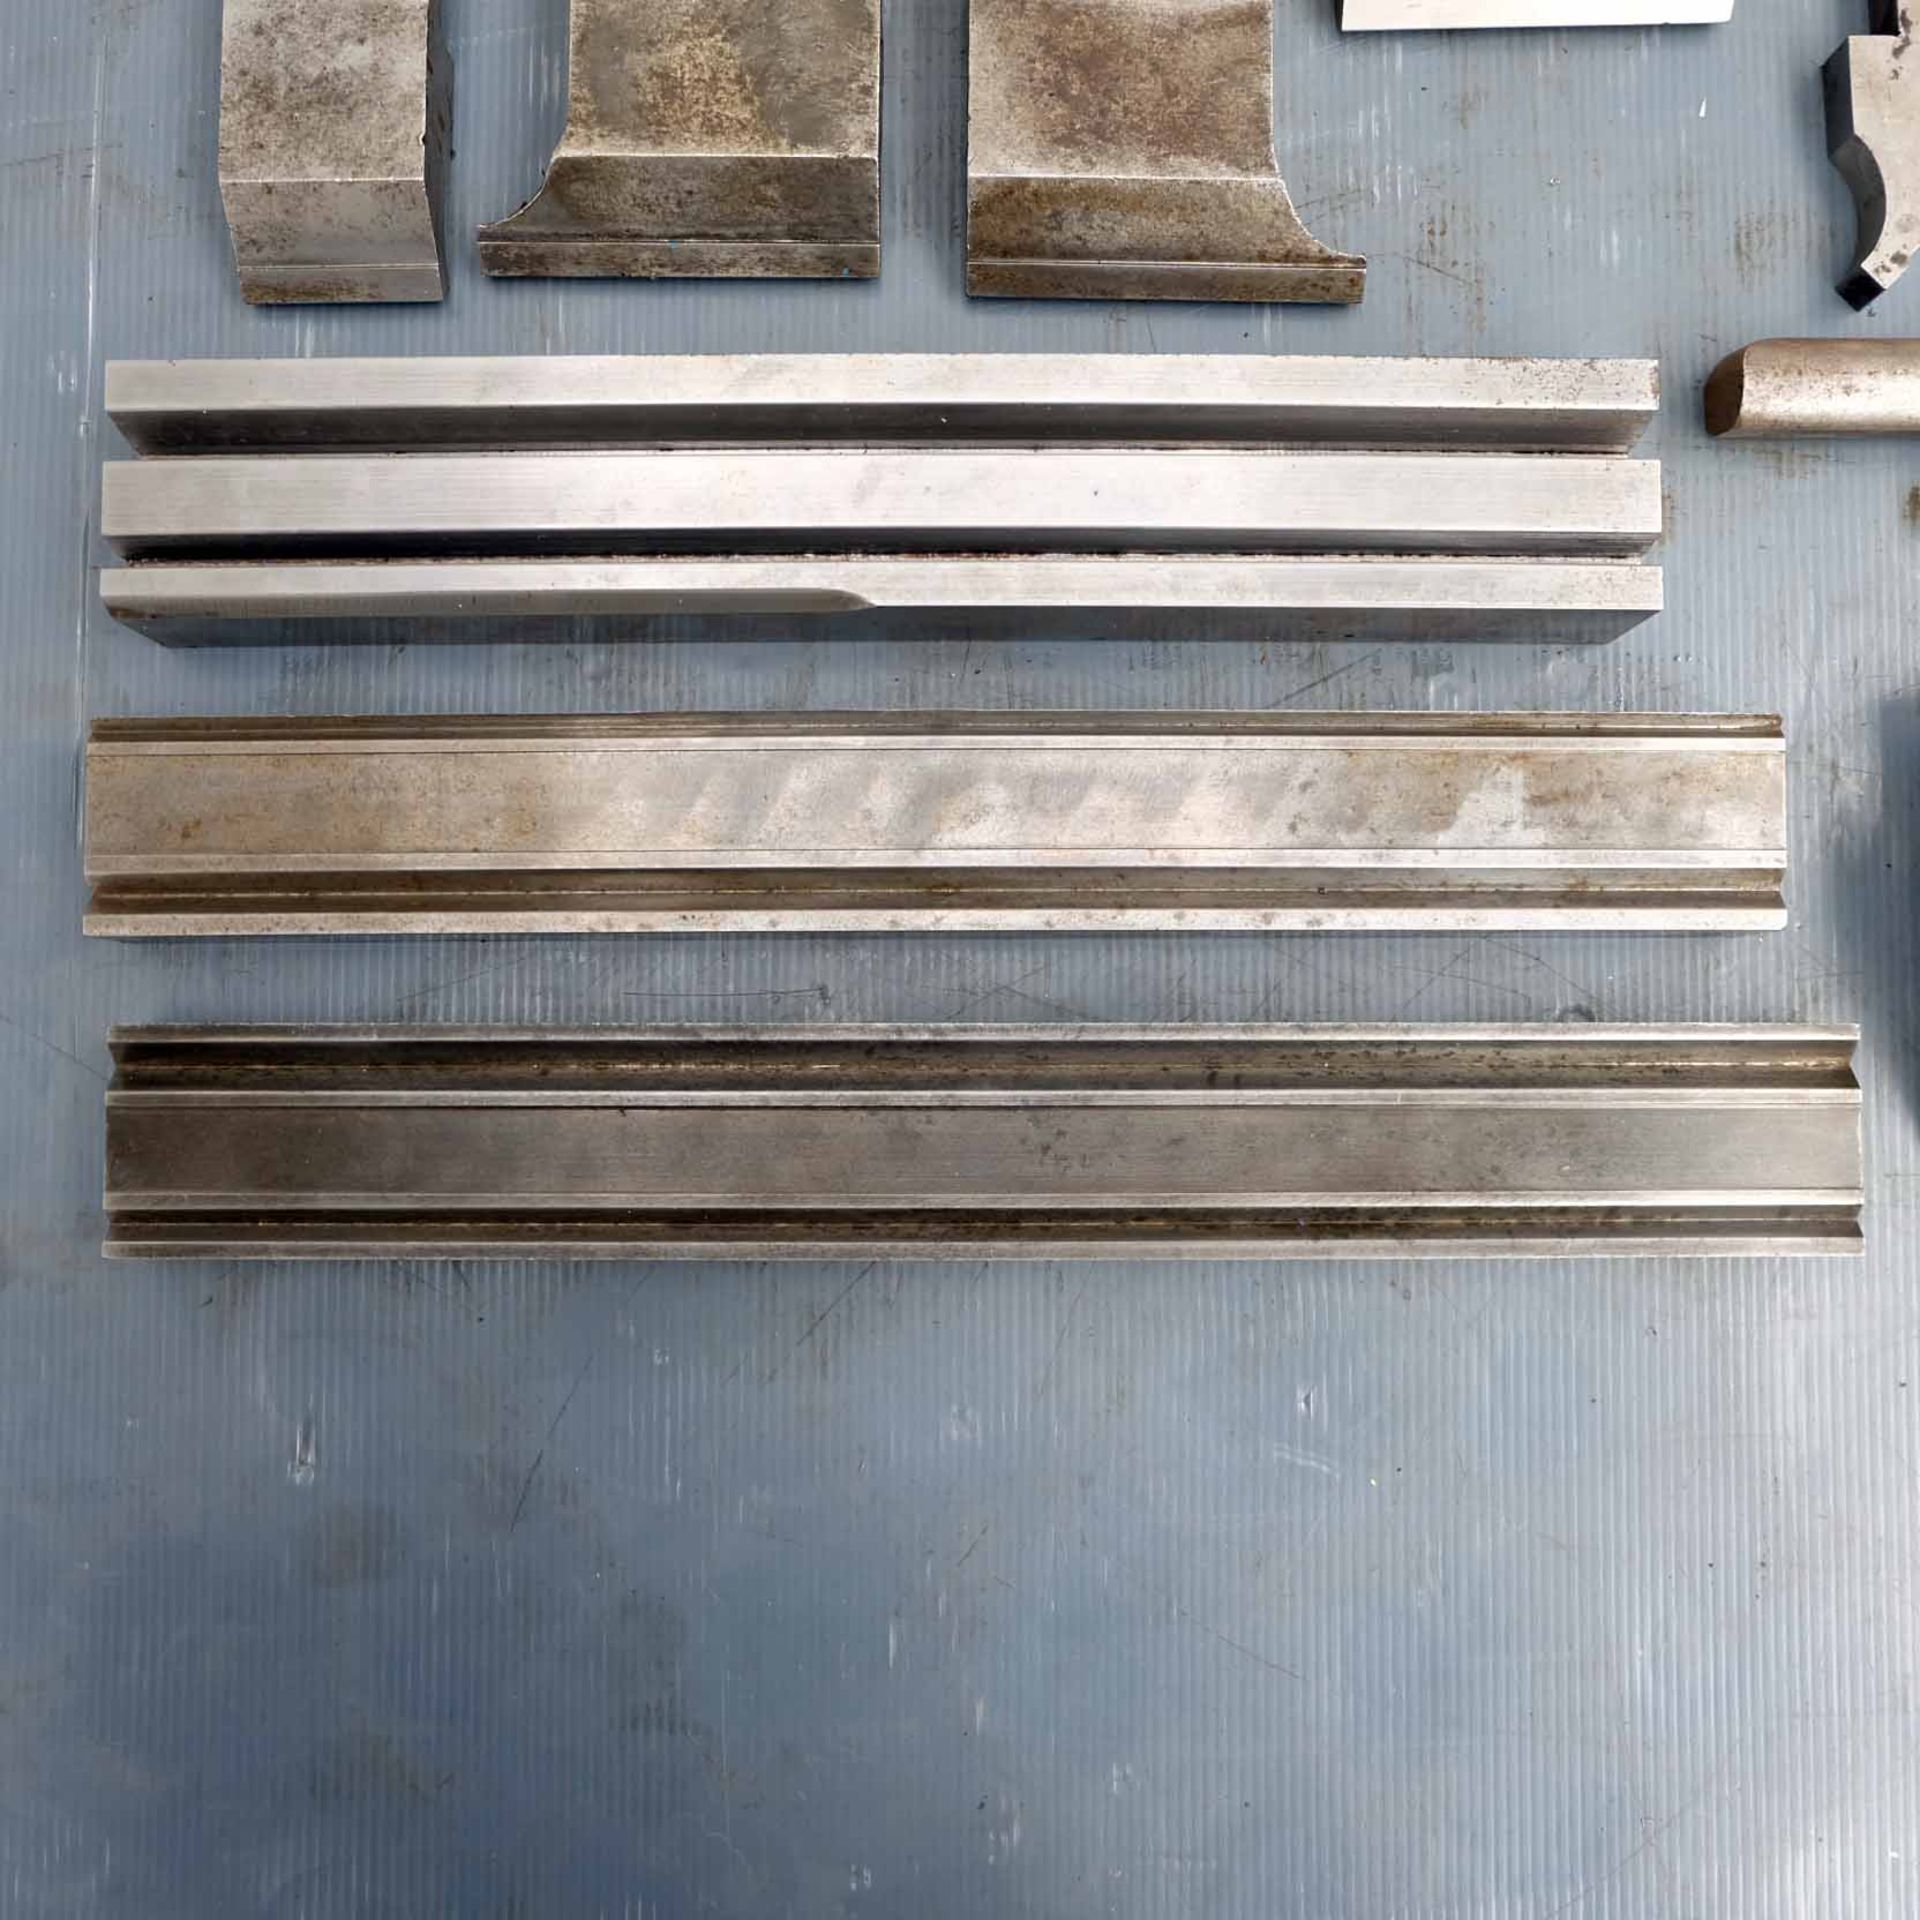 Quantity of Miscalaneous Press Brake Tooling. Various Sizes. Top & Bottom Tooling. - Image 4 of 6